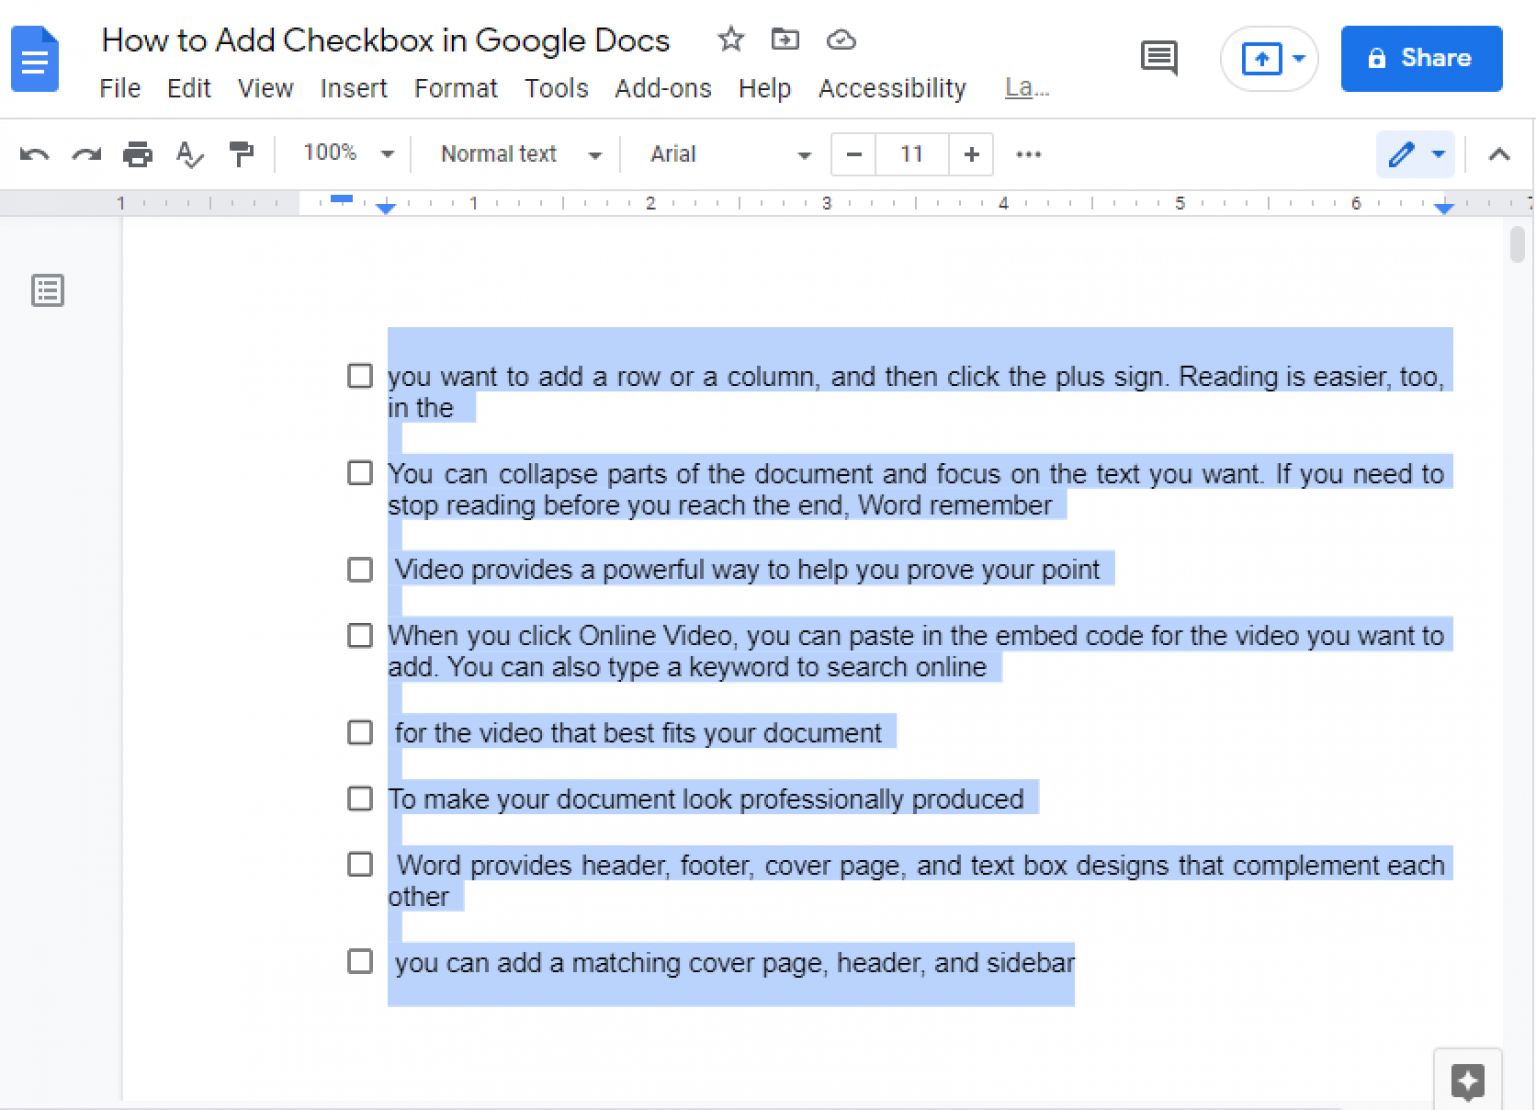 how-to-add-a-checkbox-in-google-docs-3-methods